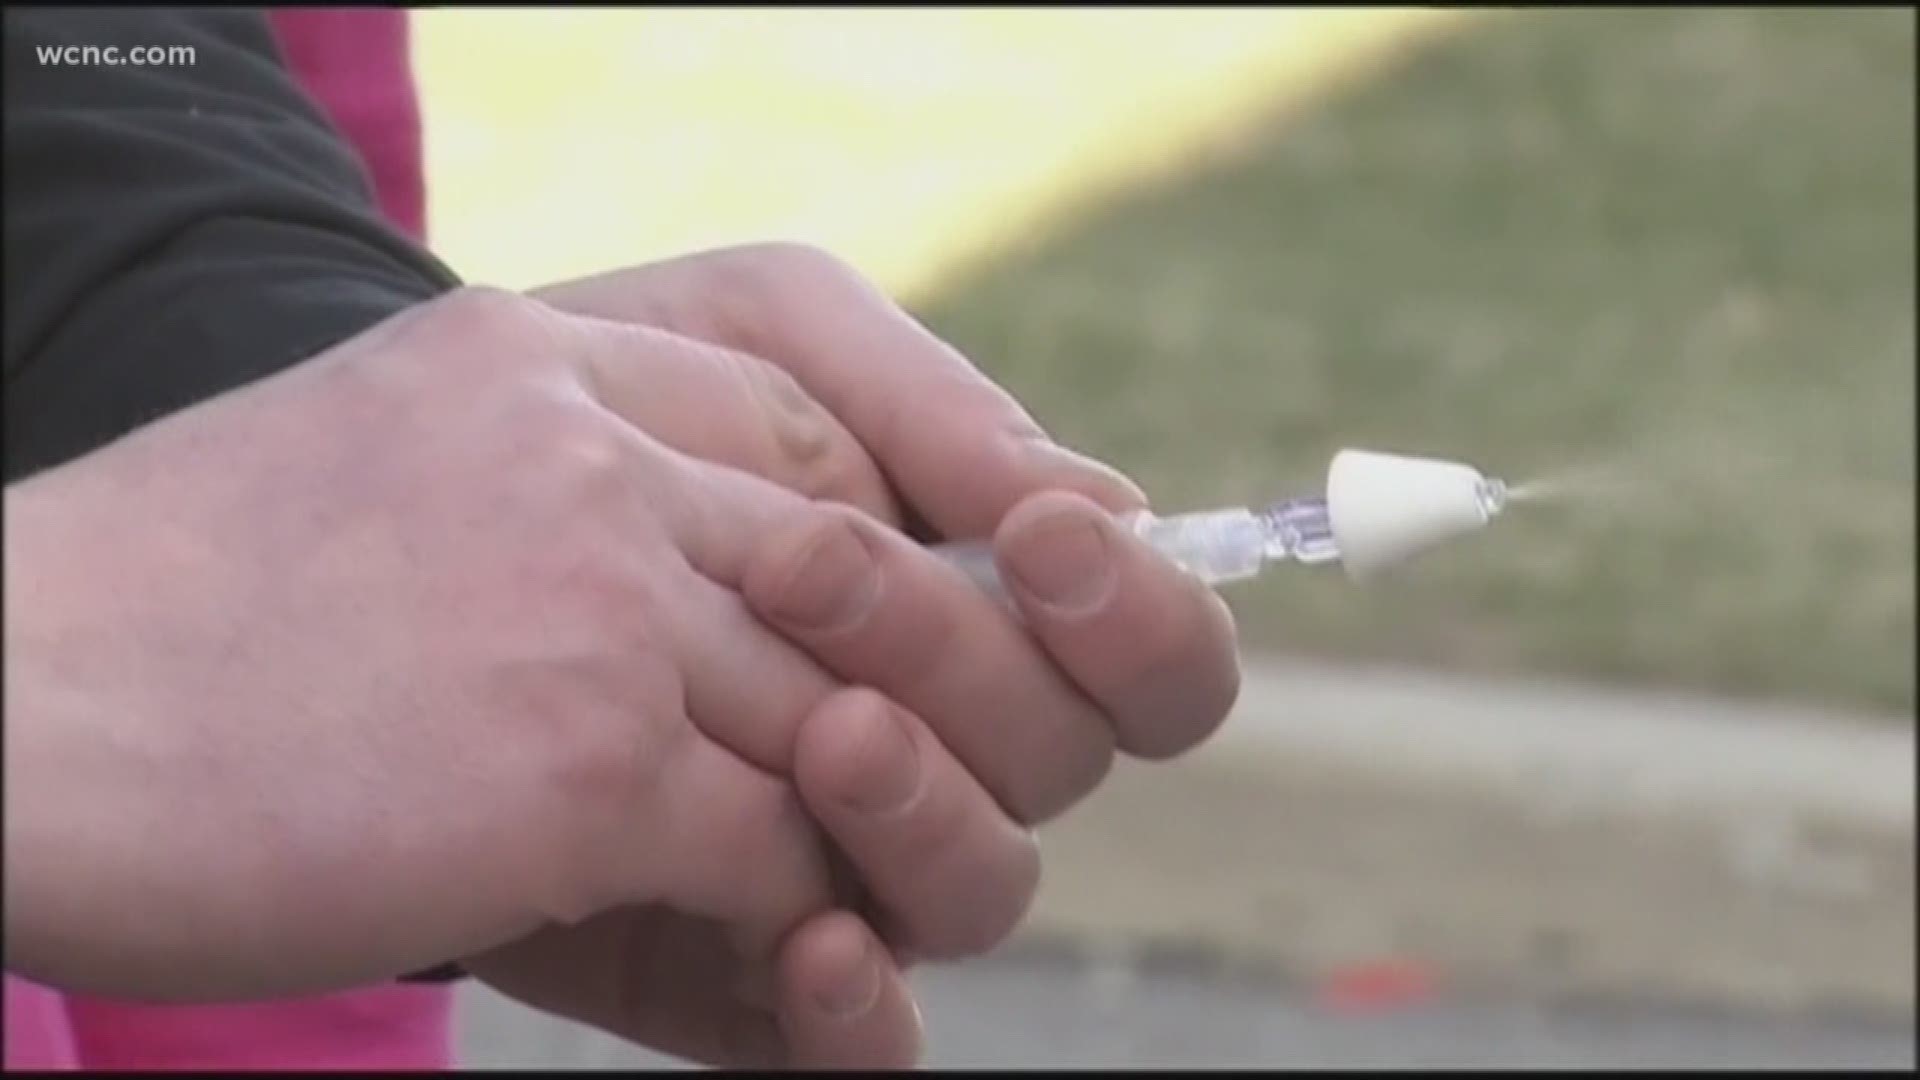 Everyone should carry narcan, says the Surgeon General